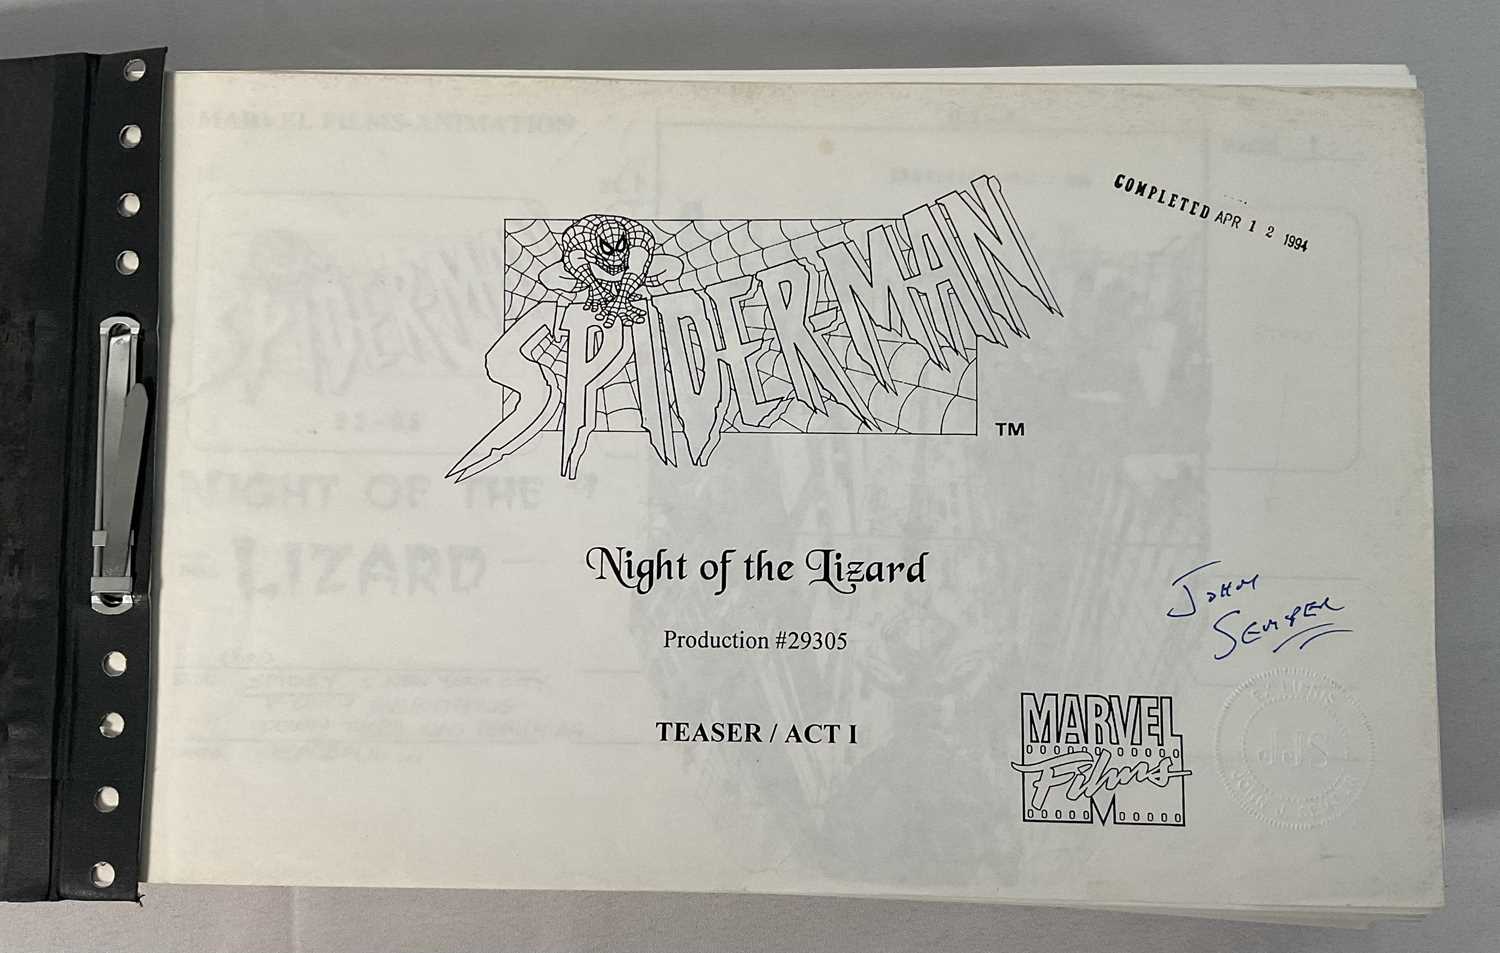 A folio of storyboards from the production of SPIDER-MAN the animated series, signed and stamped